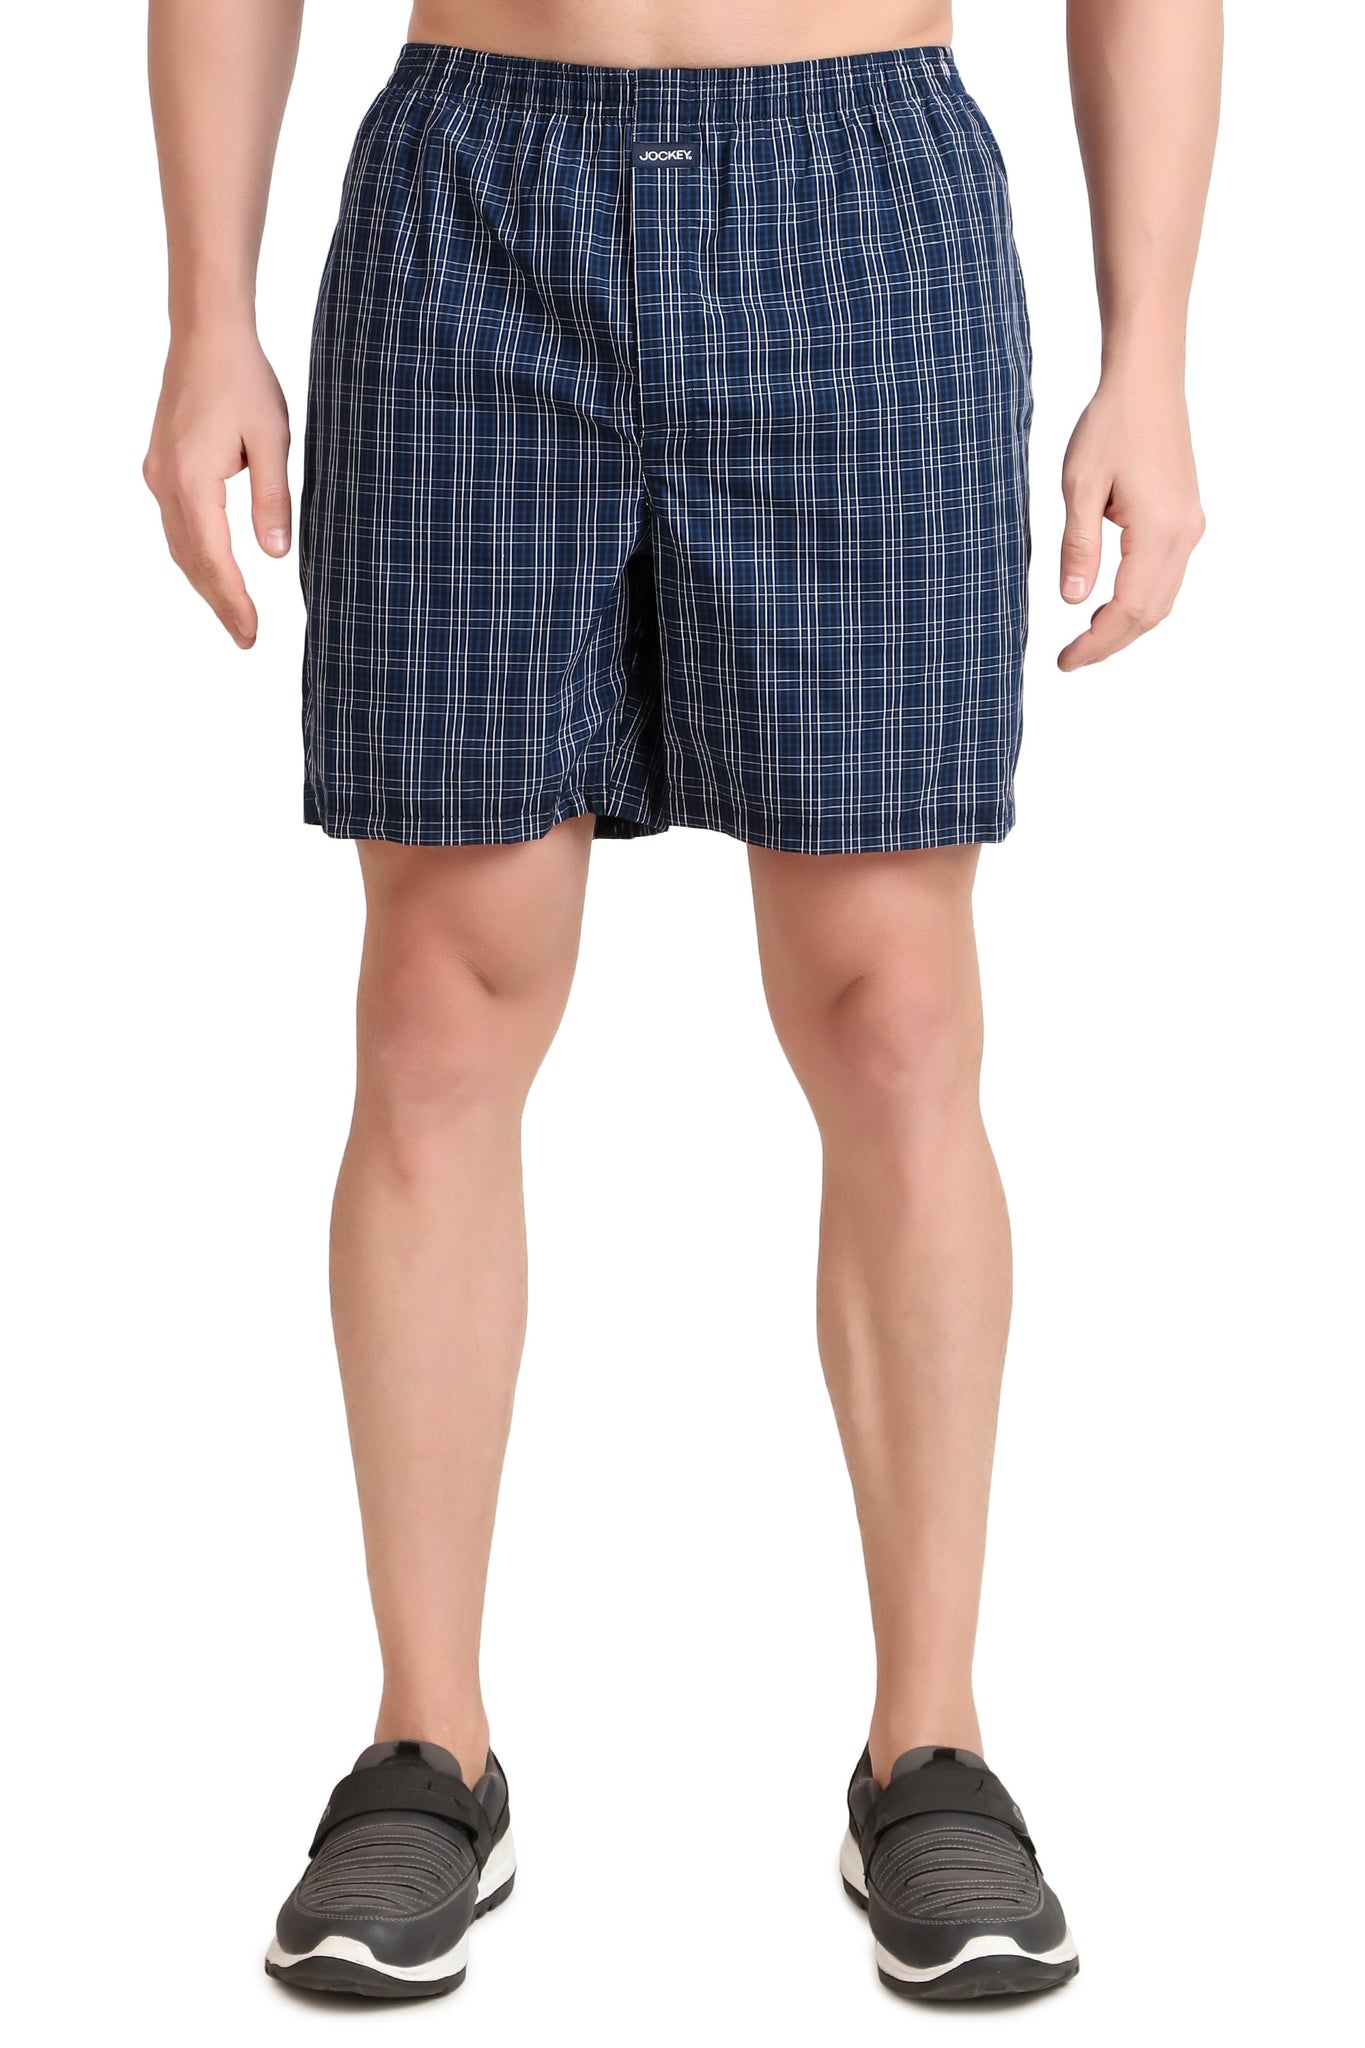 Jockey-1223 Super Combed Mercerized Cotton Woven Checkered Boxer Shorts with Side Pocket